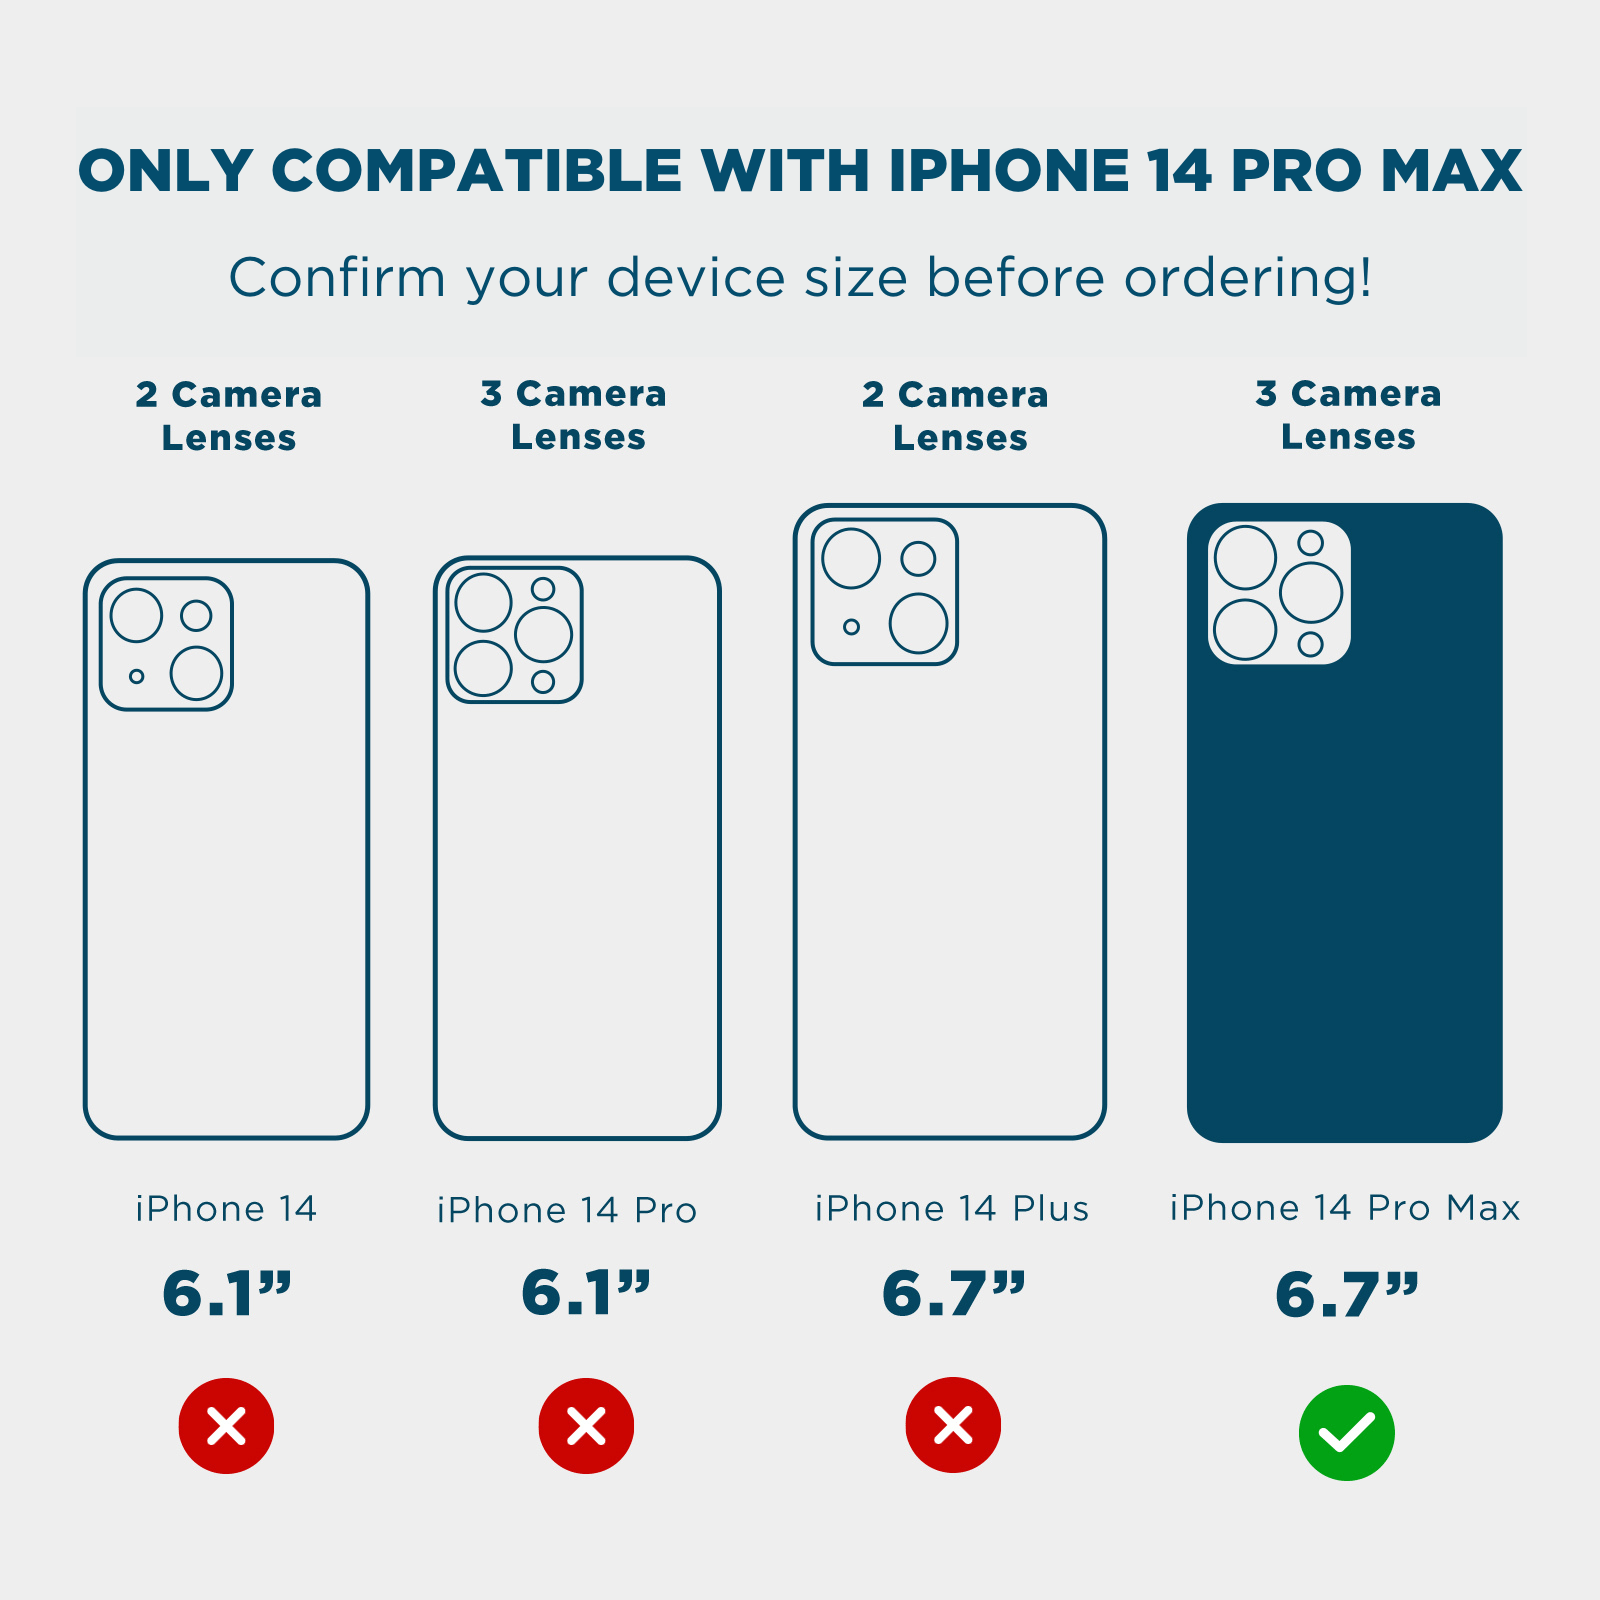 ONLY COMPATIBLE WITH IPHONE 14 PRO MAX. CONFIRM YOUR DEVICE SIZE BEFORE ORDERING. 2 CAMERA LENSES, 3 CAMERA LENSES, 2 CAMERA LENSES, 3 CAMERA LENSES, 6.1, 6.1, 6.7, 6.7. COLOR::TWINKLE DIAMOND